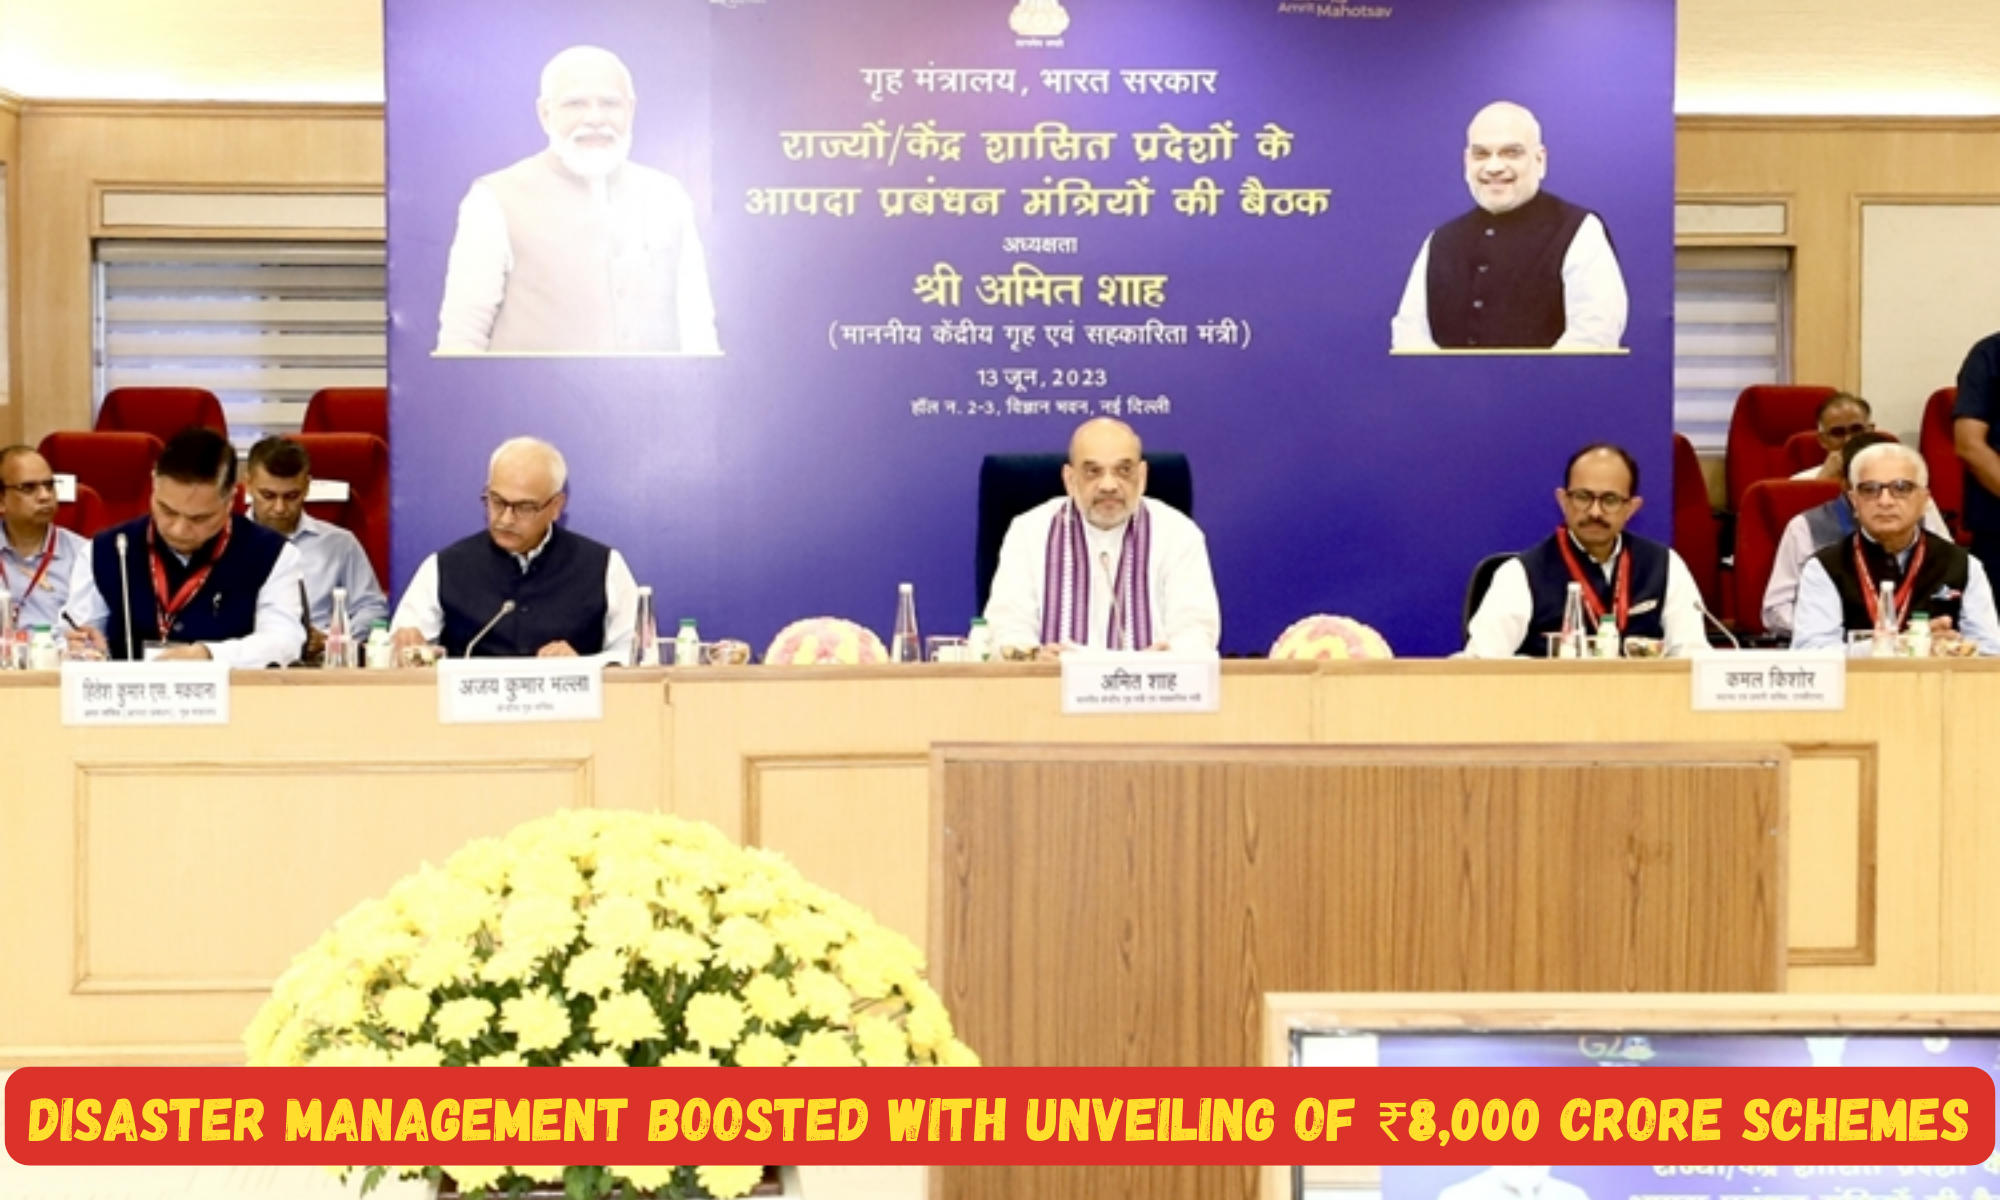 Disaster Management Boosted with Unveiling of ₹8,000 Crore Schemes